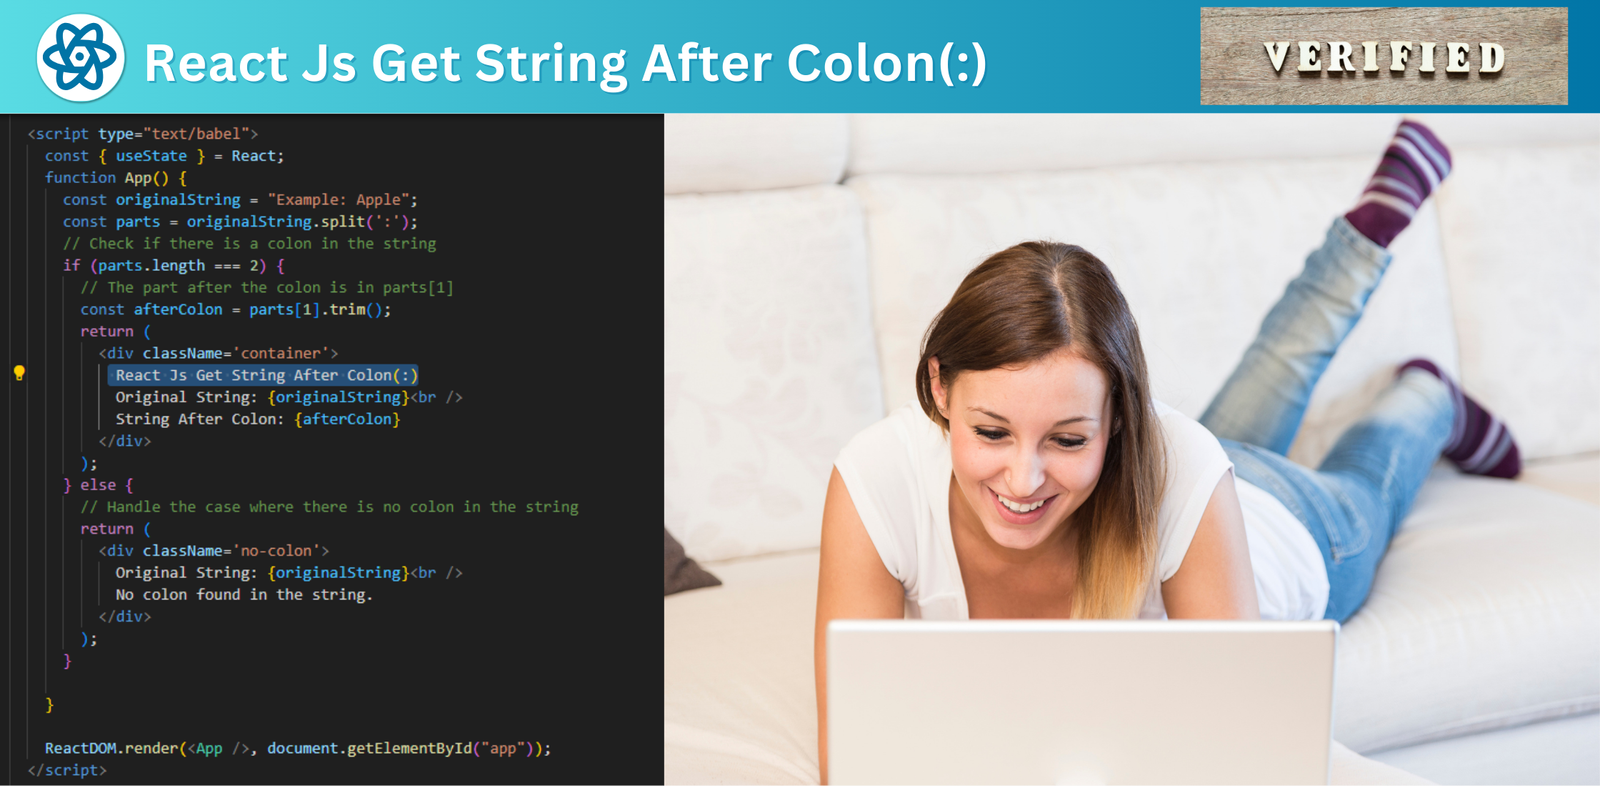 React Js Get String After Colon(:) 